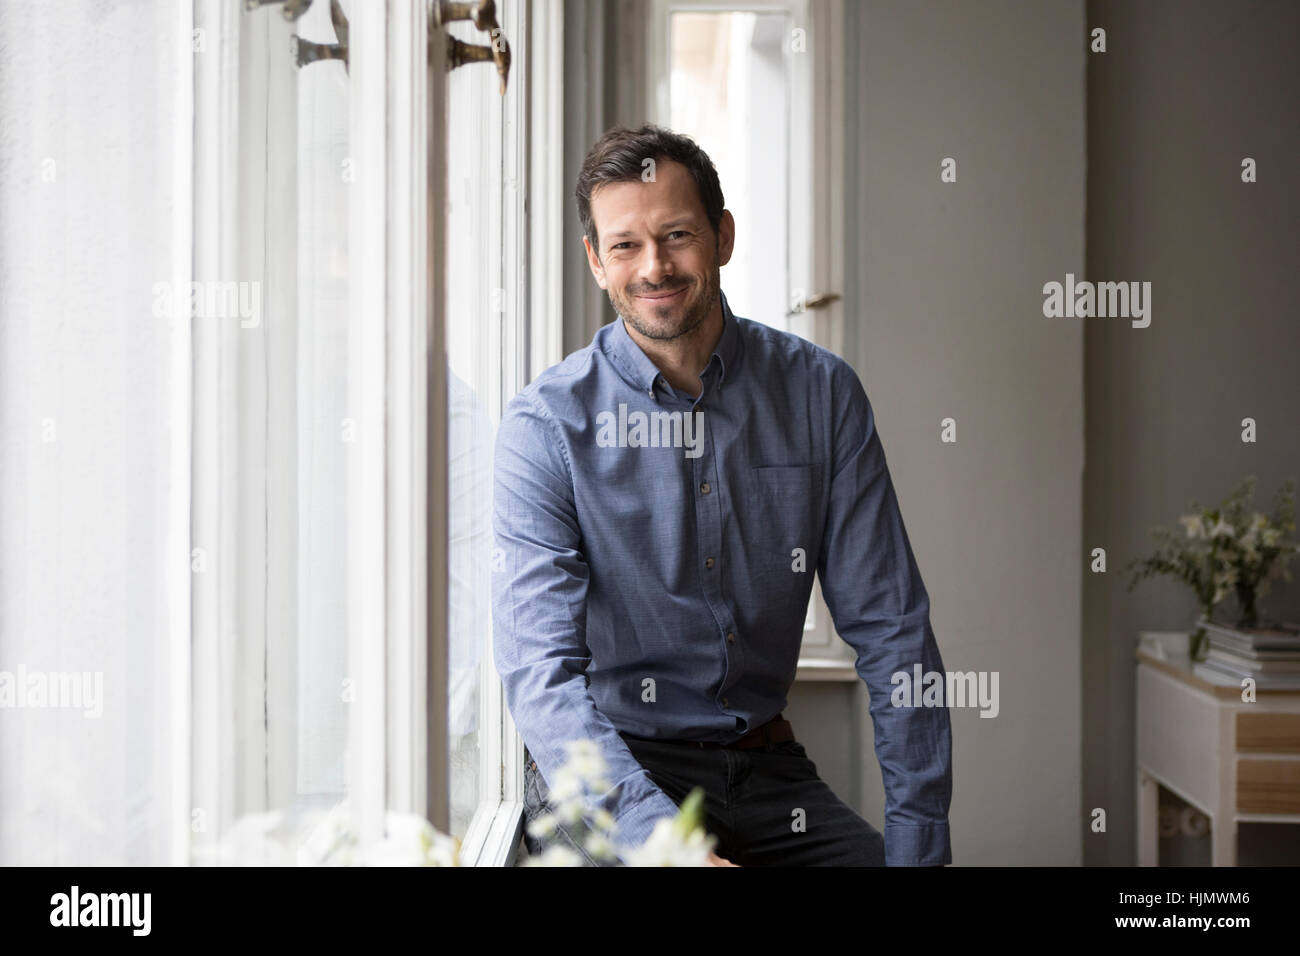 Portrait of content man at home Stock Photo